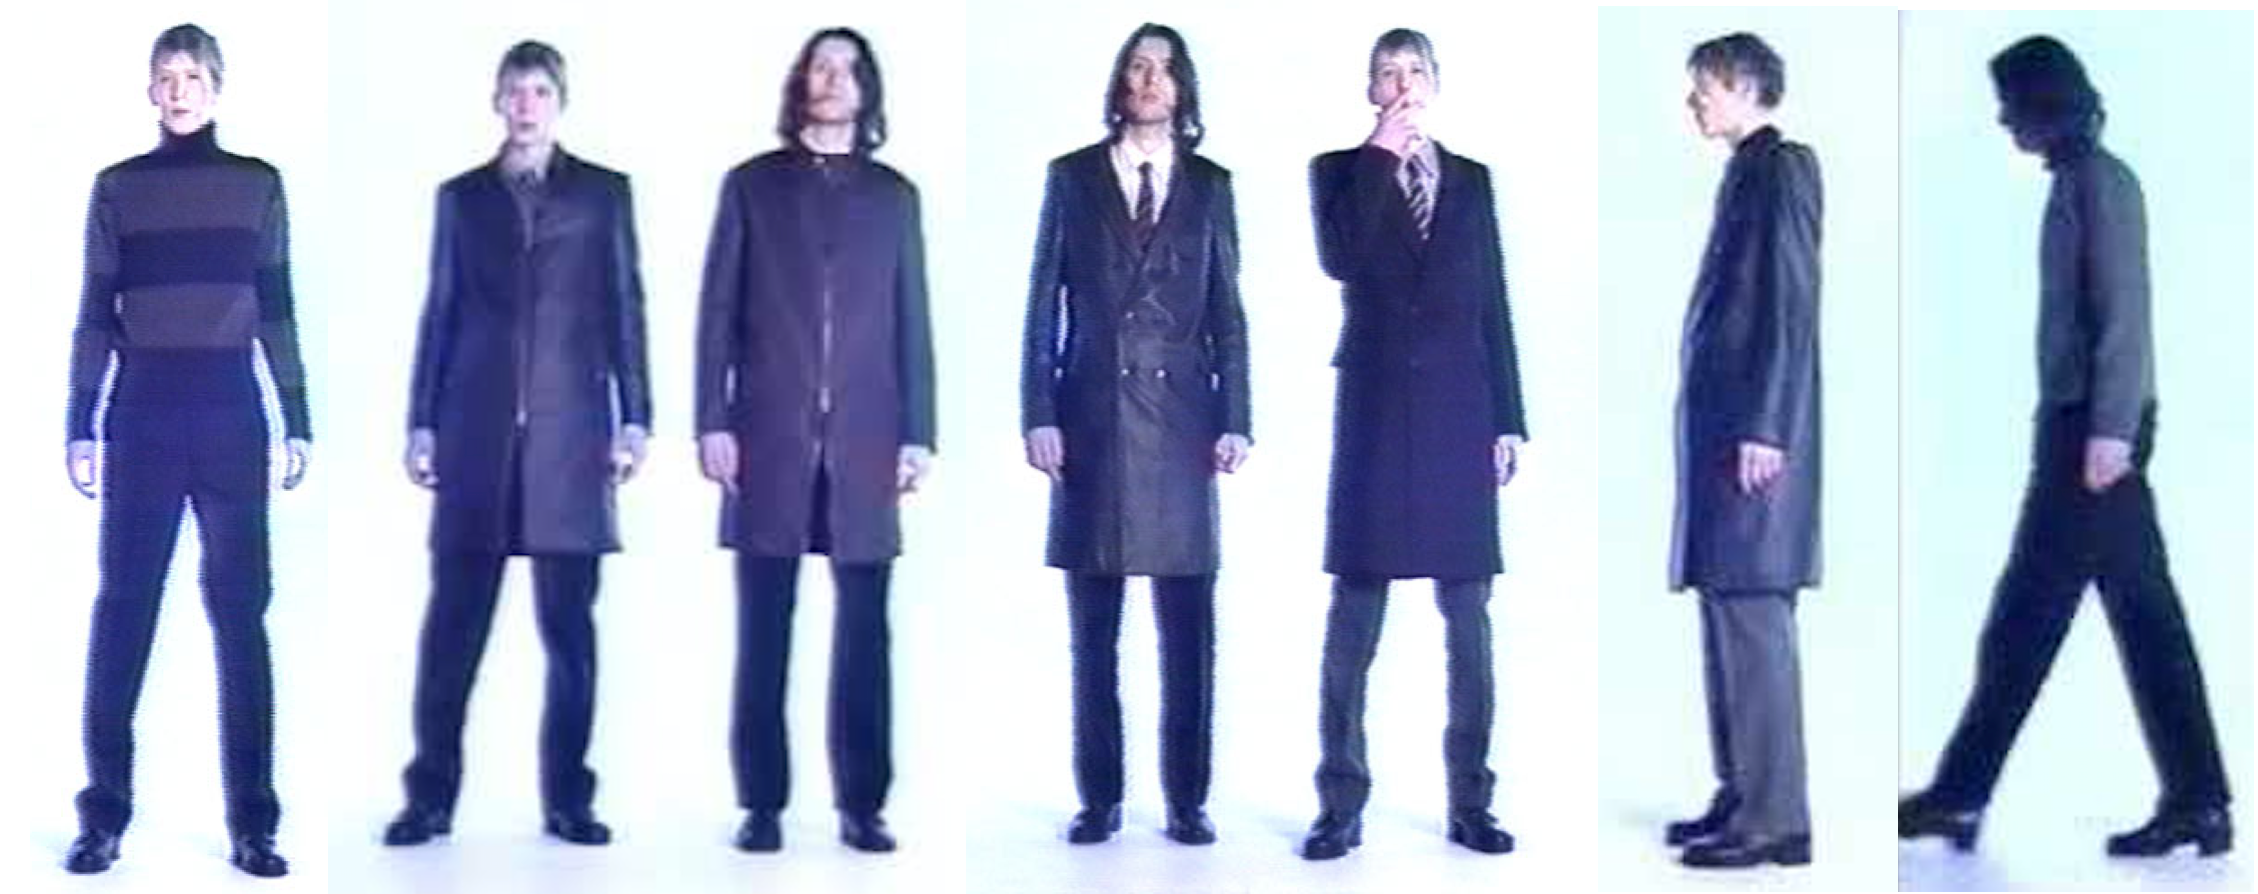 The Raf Simons Archive Takes Center Stage in New A$AP Video — The